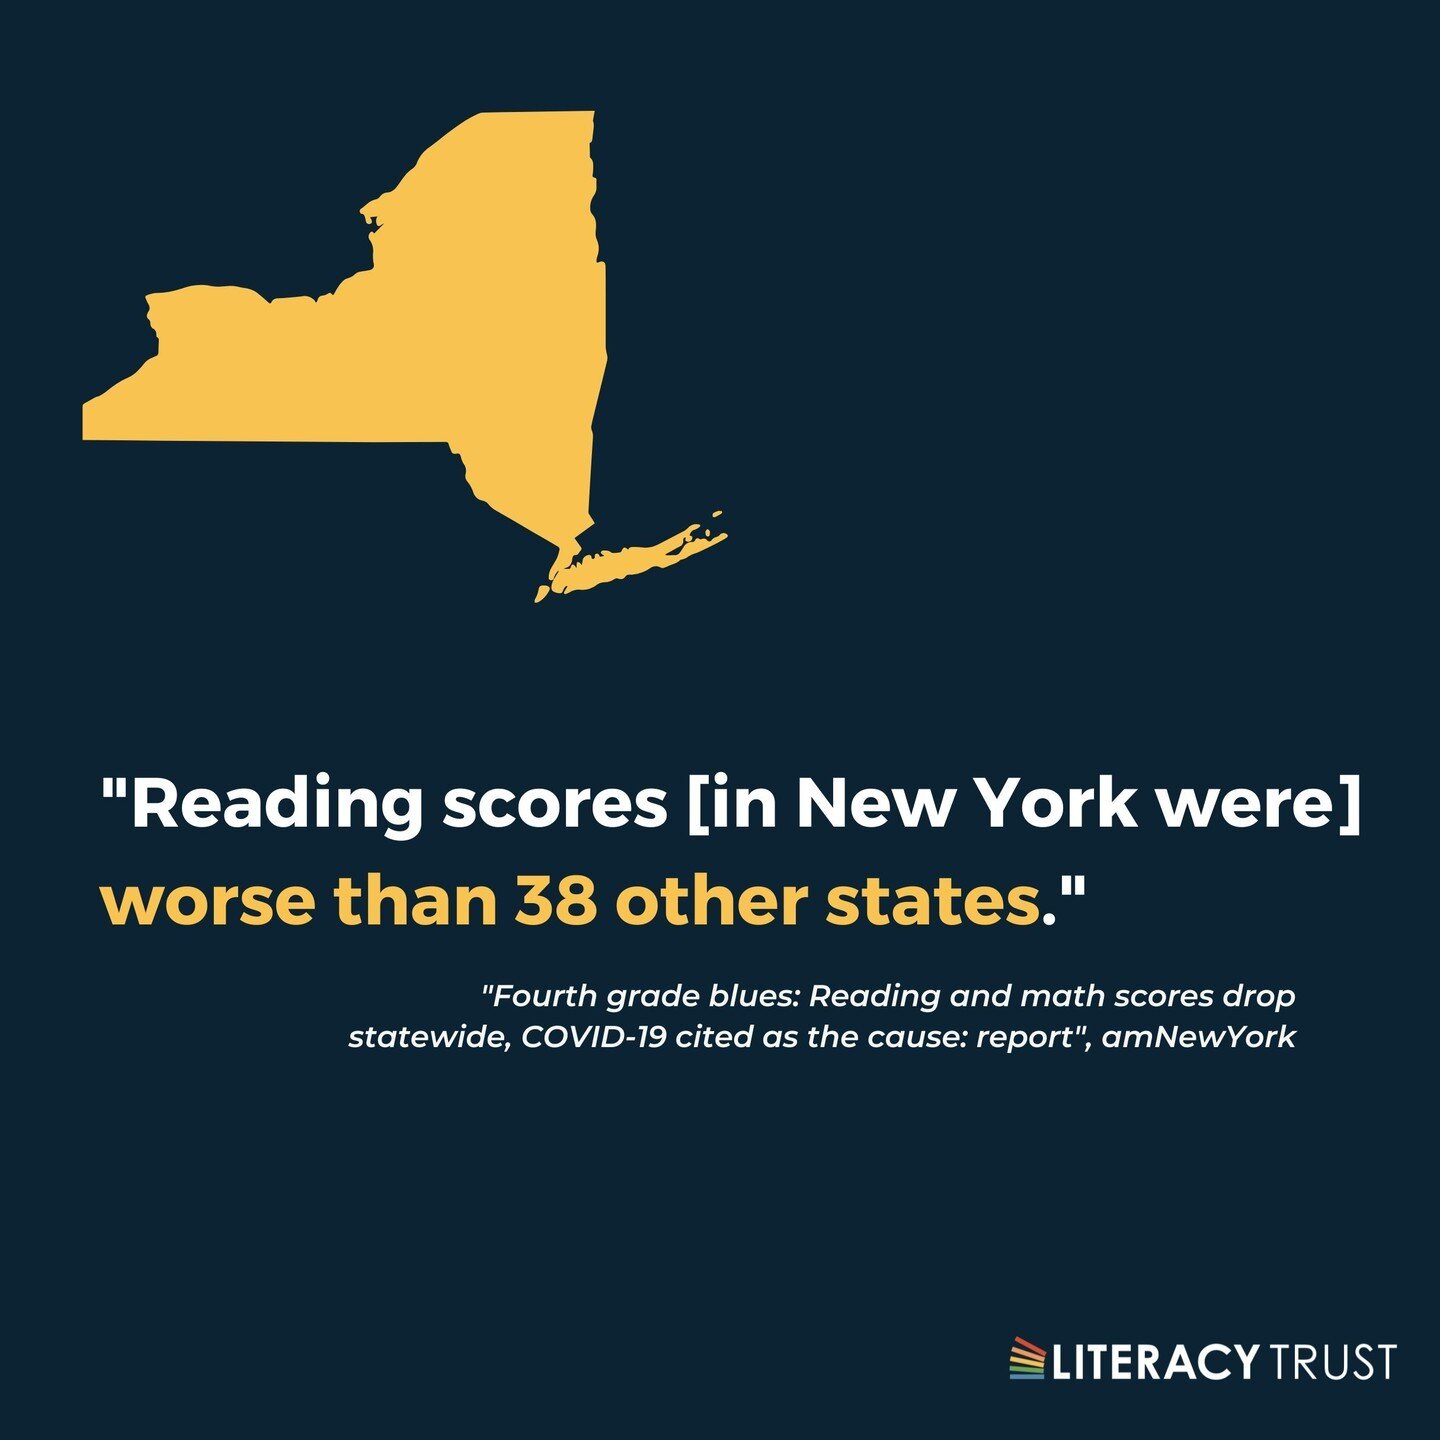 According to @amNewYork's article, &quot;The 'nation&rsquo;s report card,' led by the federal Department of Education&rsquo;s National Assessment of Educational Progress, showed that the decline in fourth grade math and reading scores in New York sta